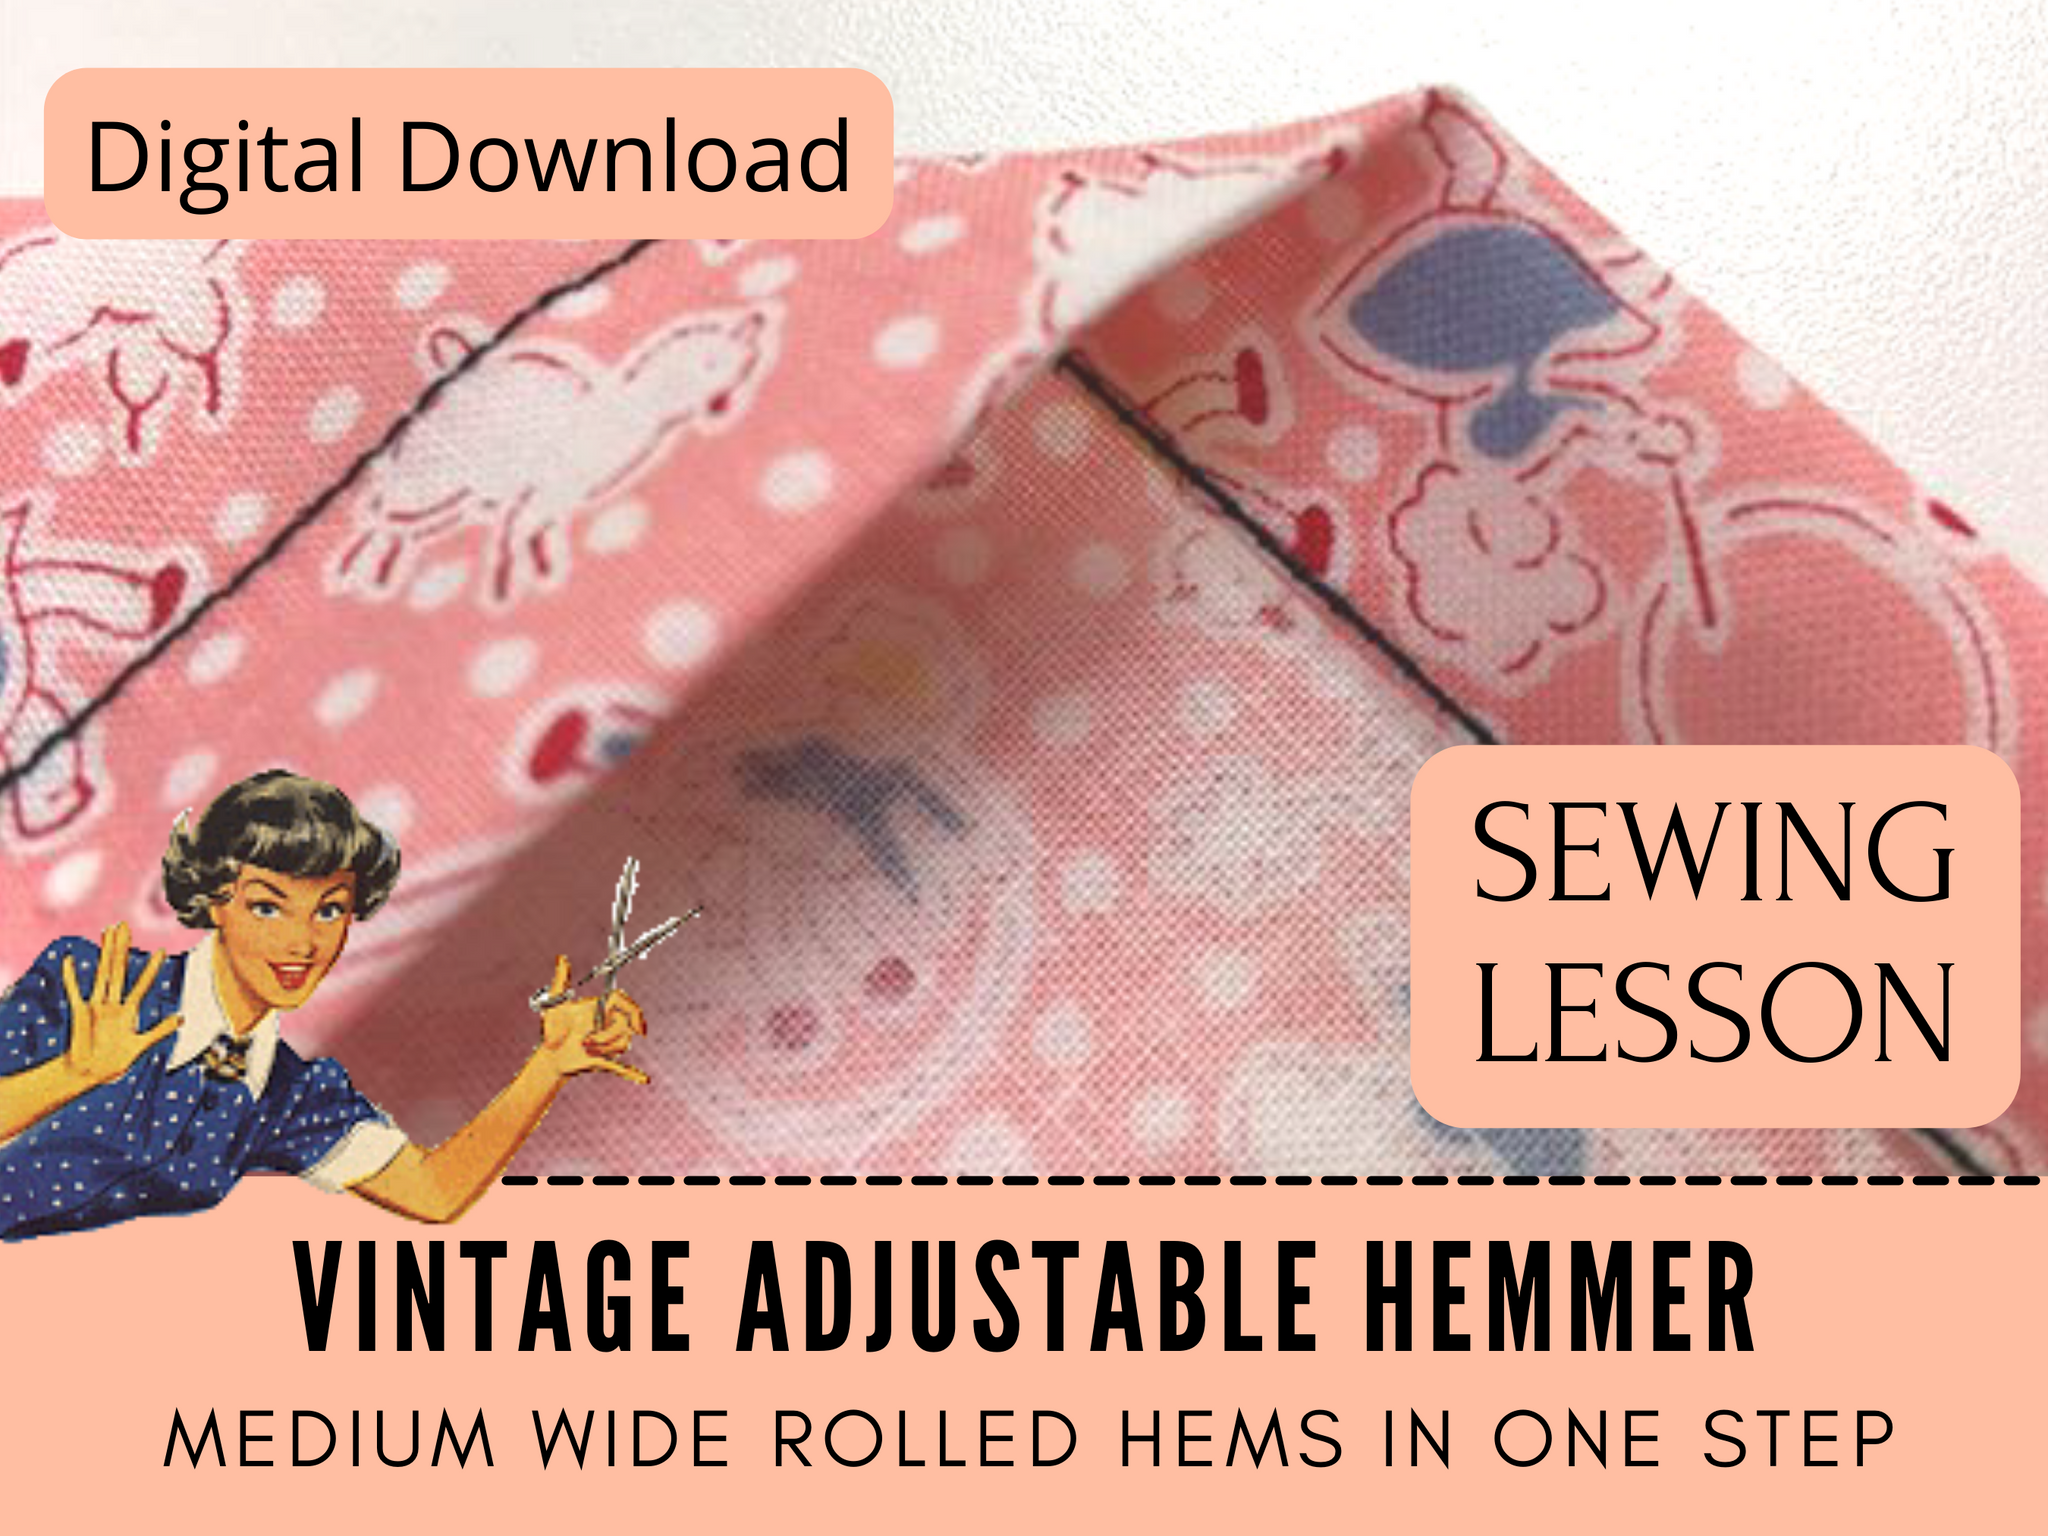 How to use an Adjustable Hemmer 